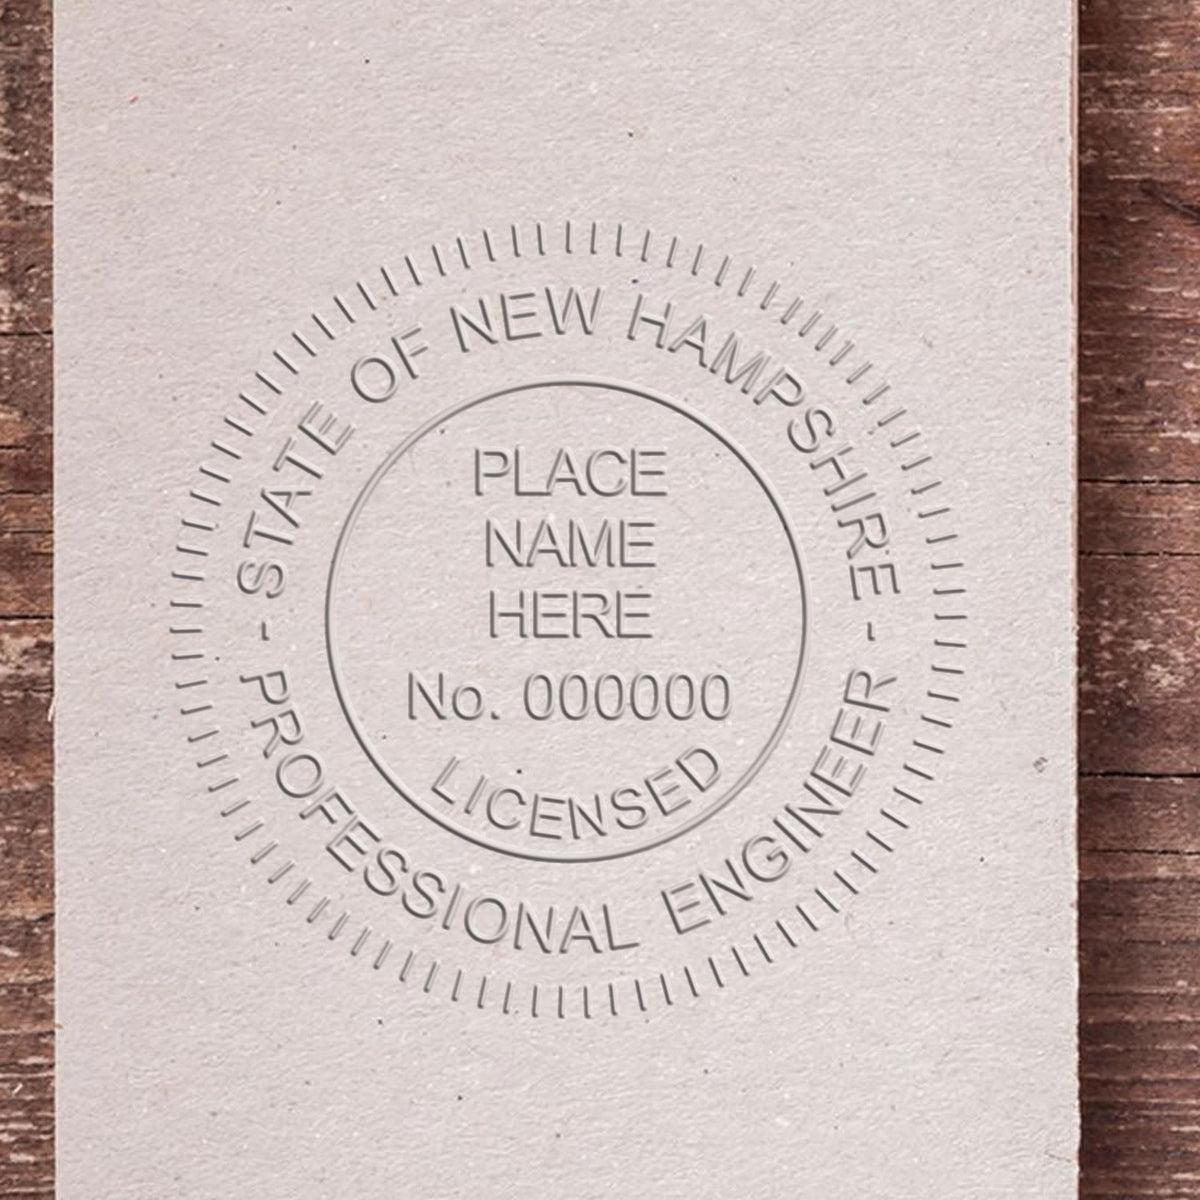 A stamped impression of the New Hampshire Engineer Desk Seal in this stylish lifestyle photo, setting the tone for a unique and personalized product.